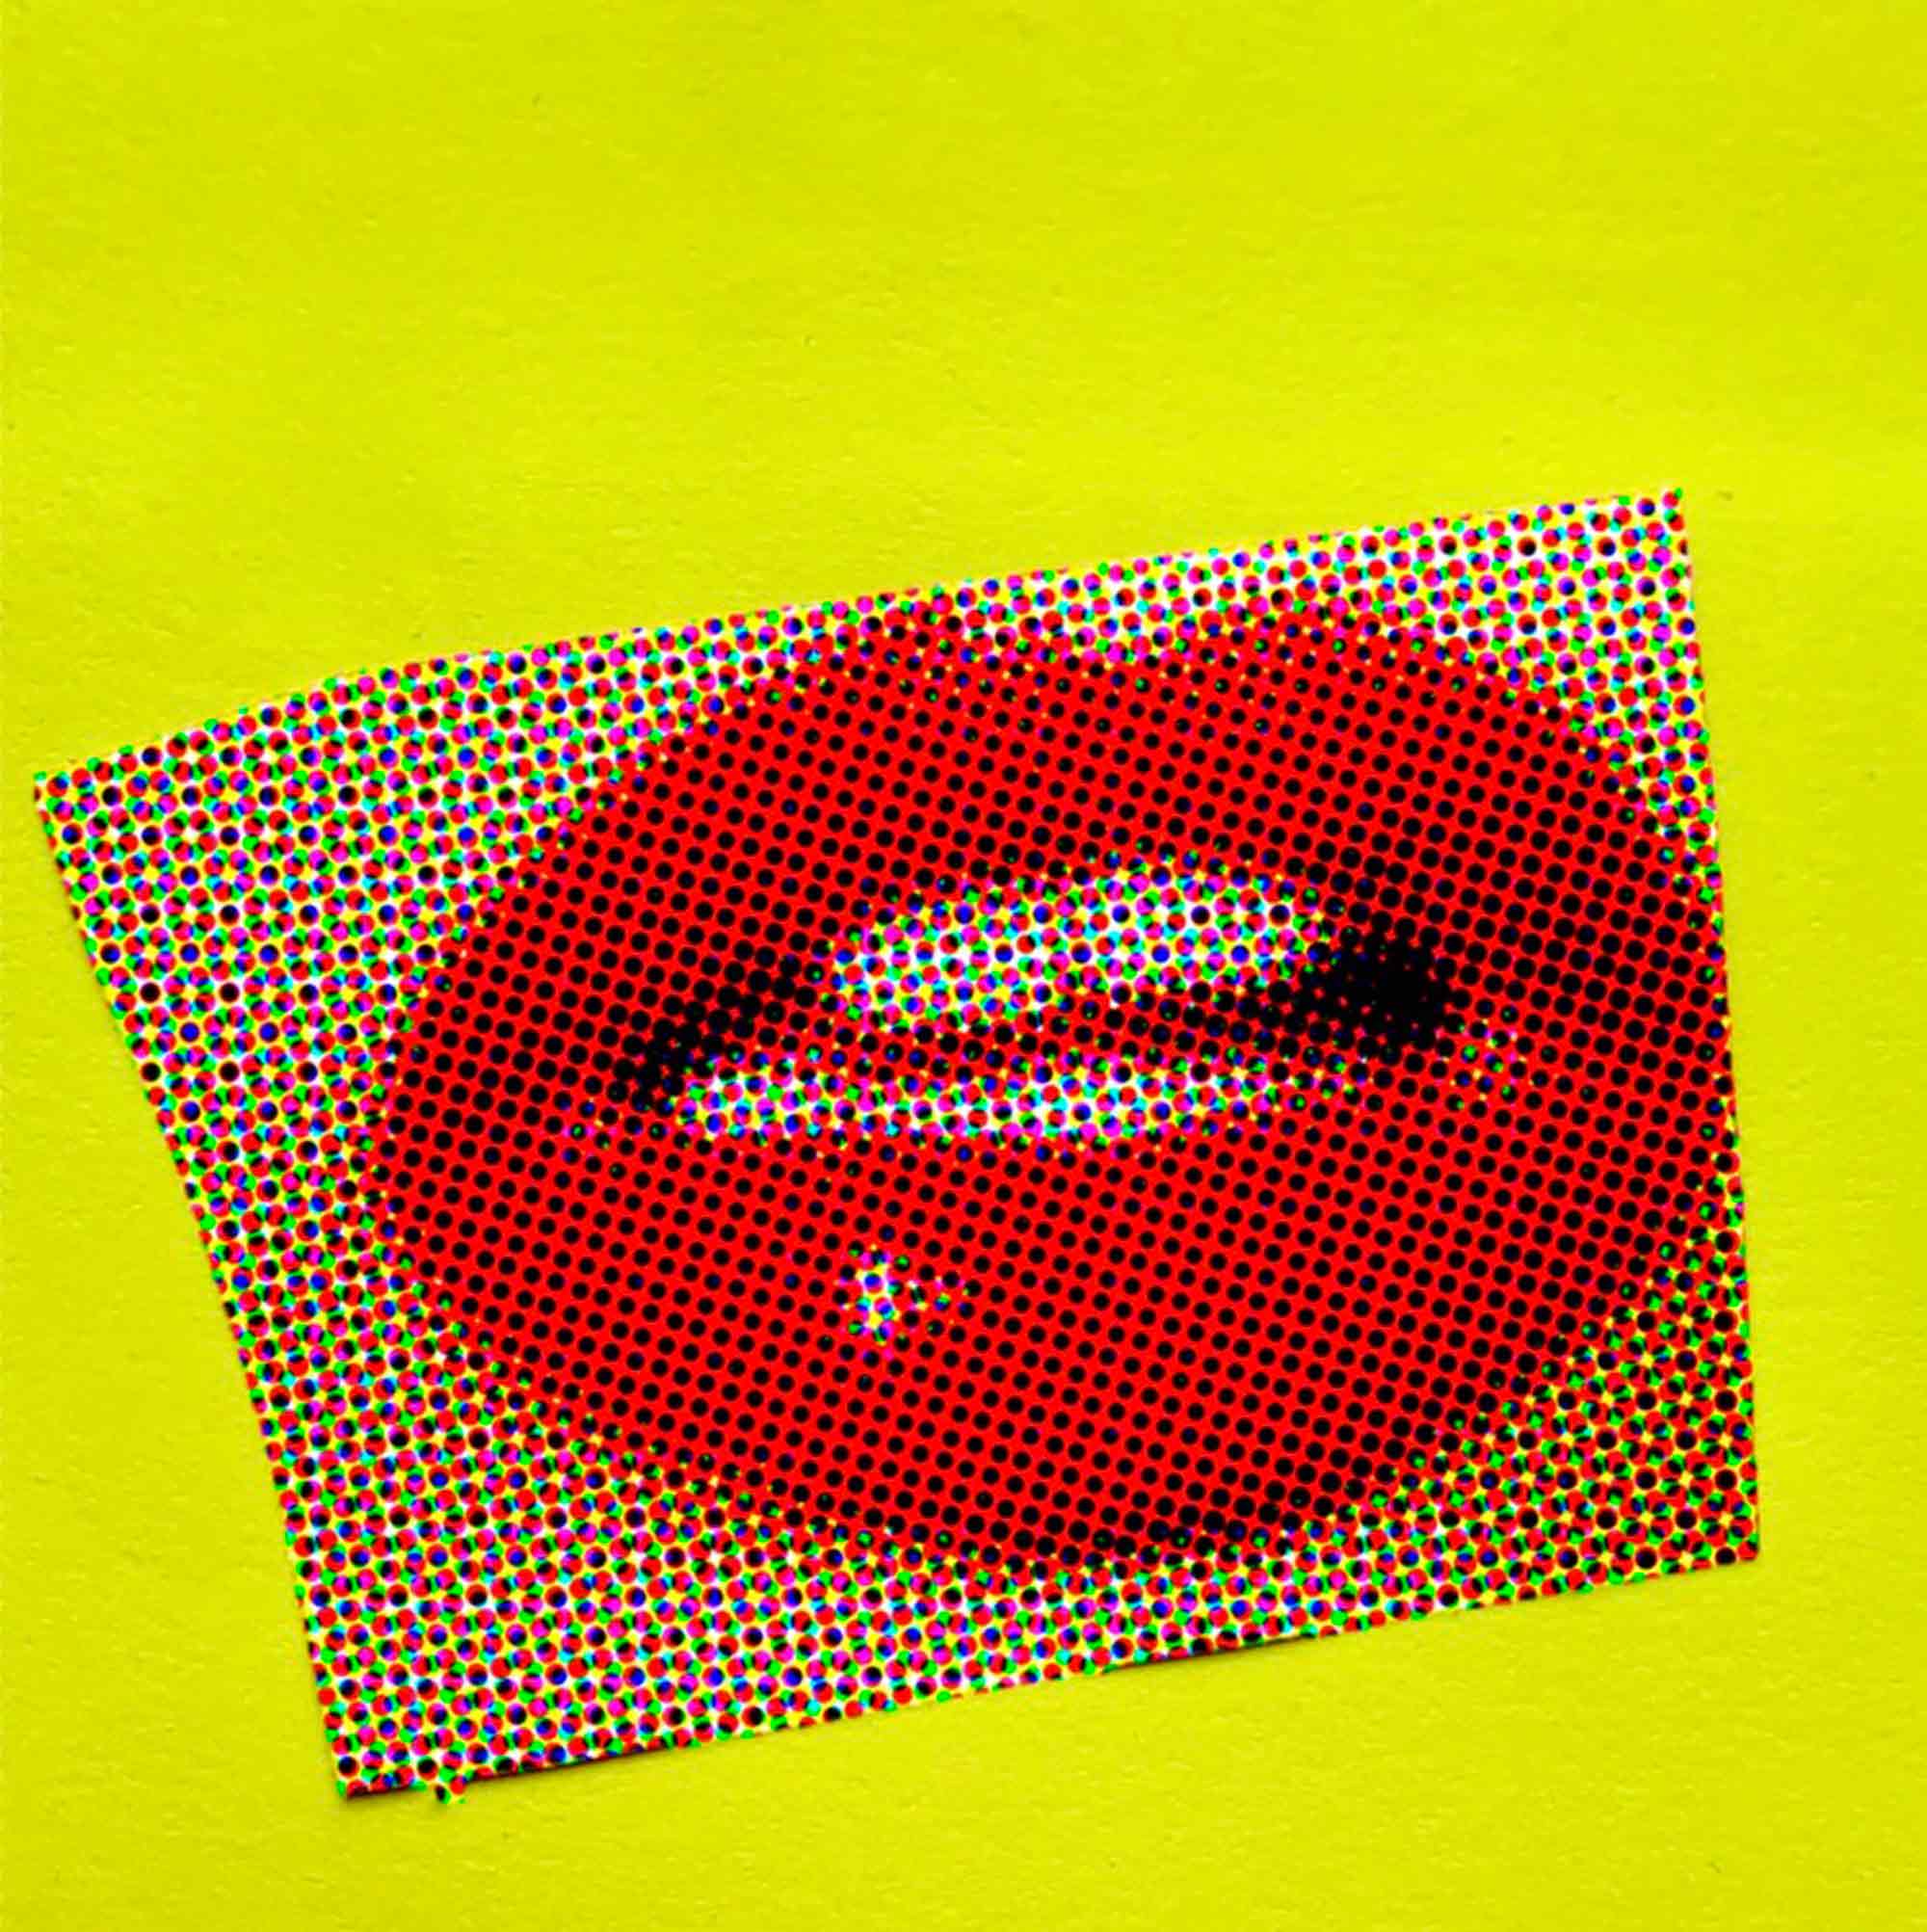 Collage Series - Post-it Note, 2021